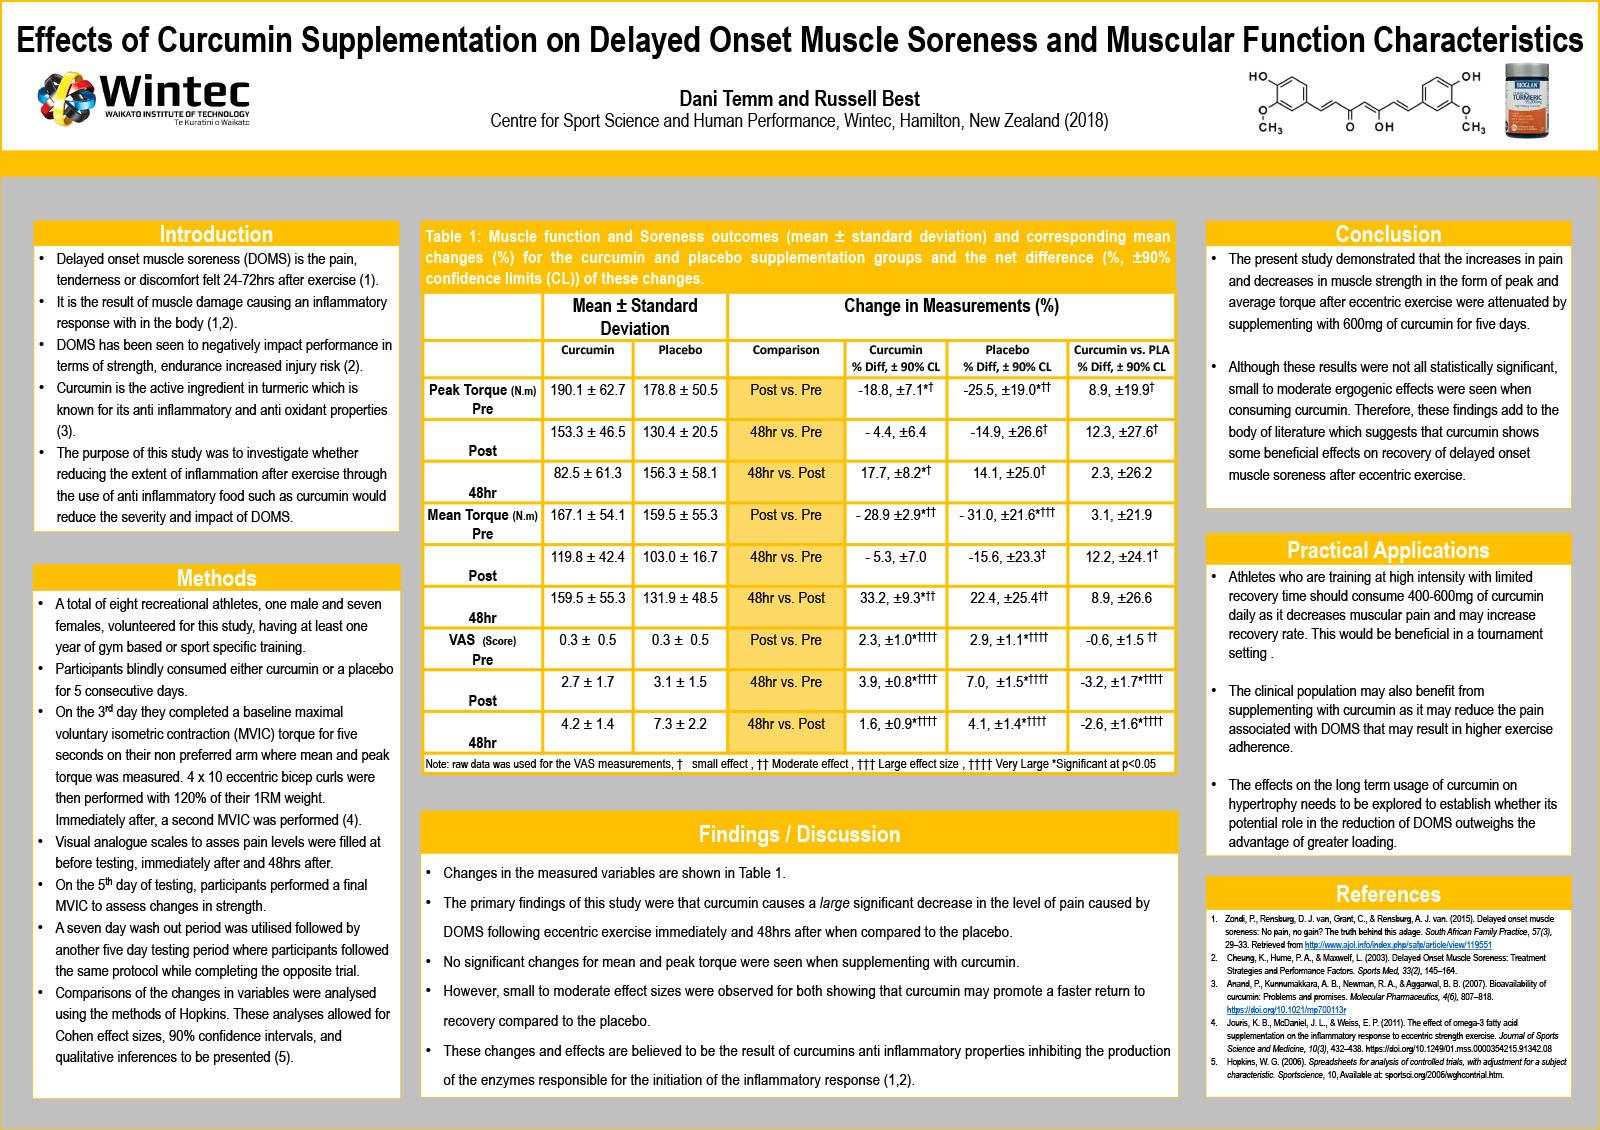 Effects of Curcumin Supplementation on Delayed Onset Muscle Soreness and Muscular Function Characteristics